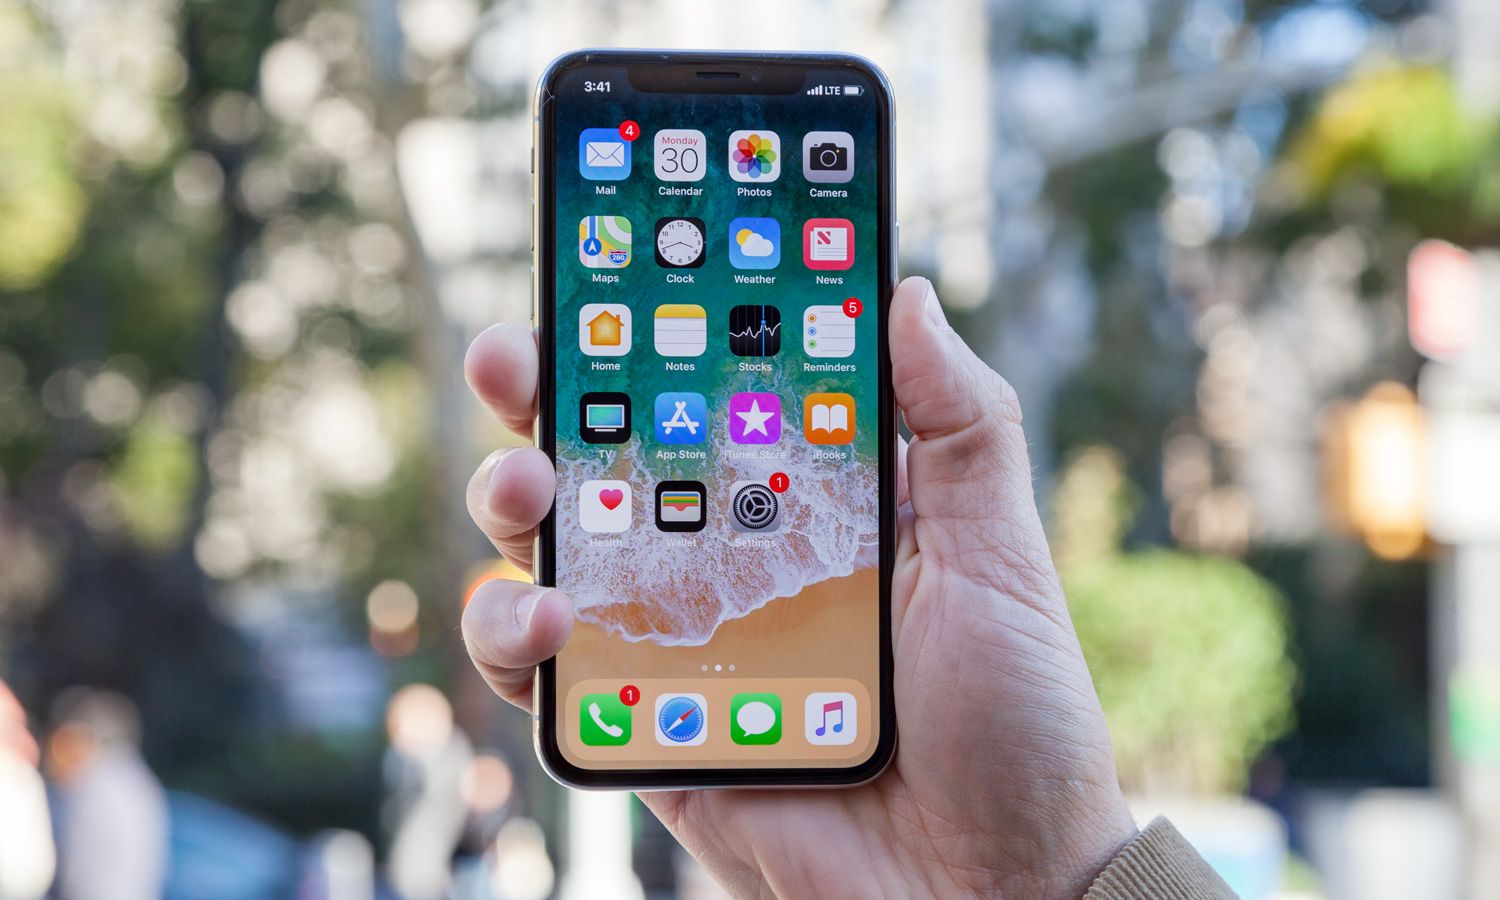 iphone-x-beats-samsung-note-8-and-7-edge-in-burn-in-test